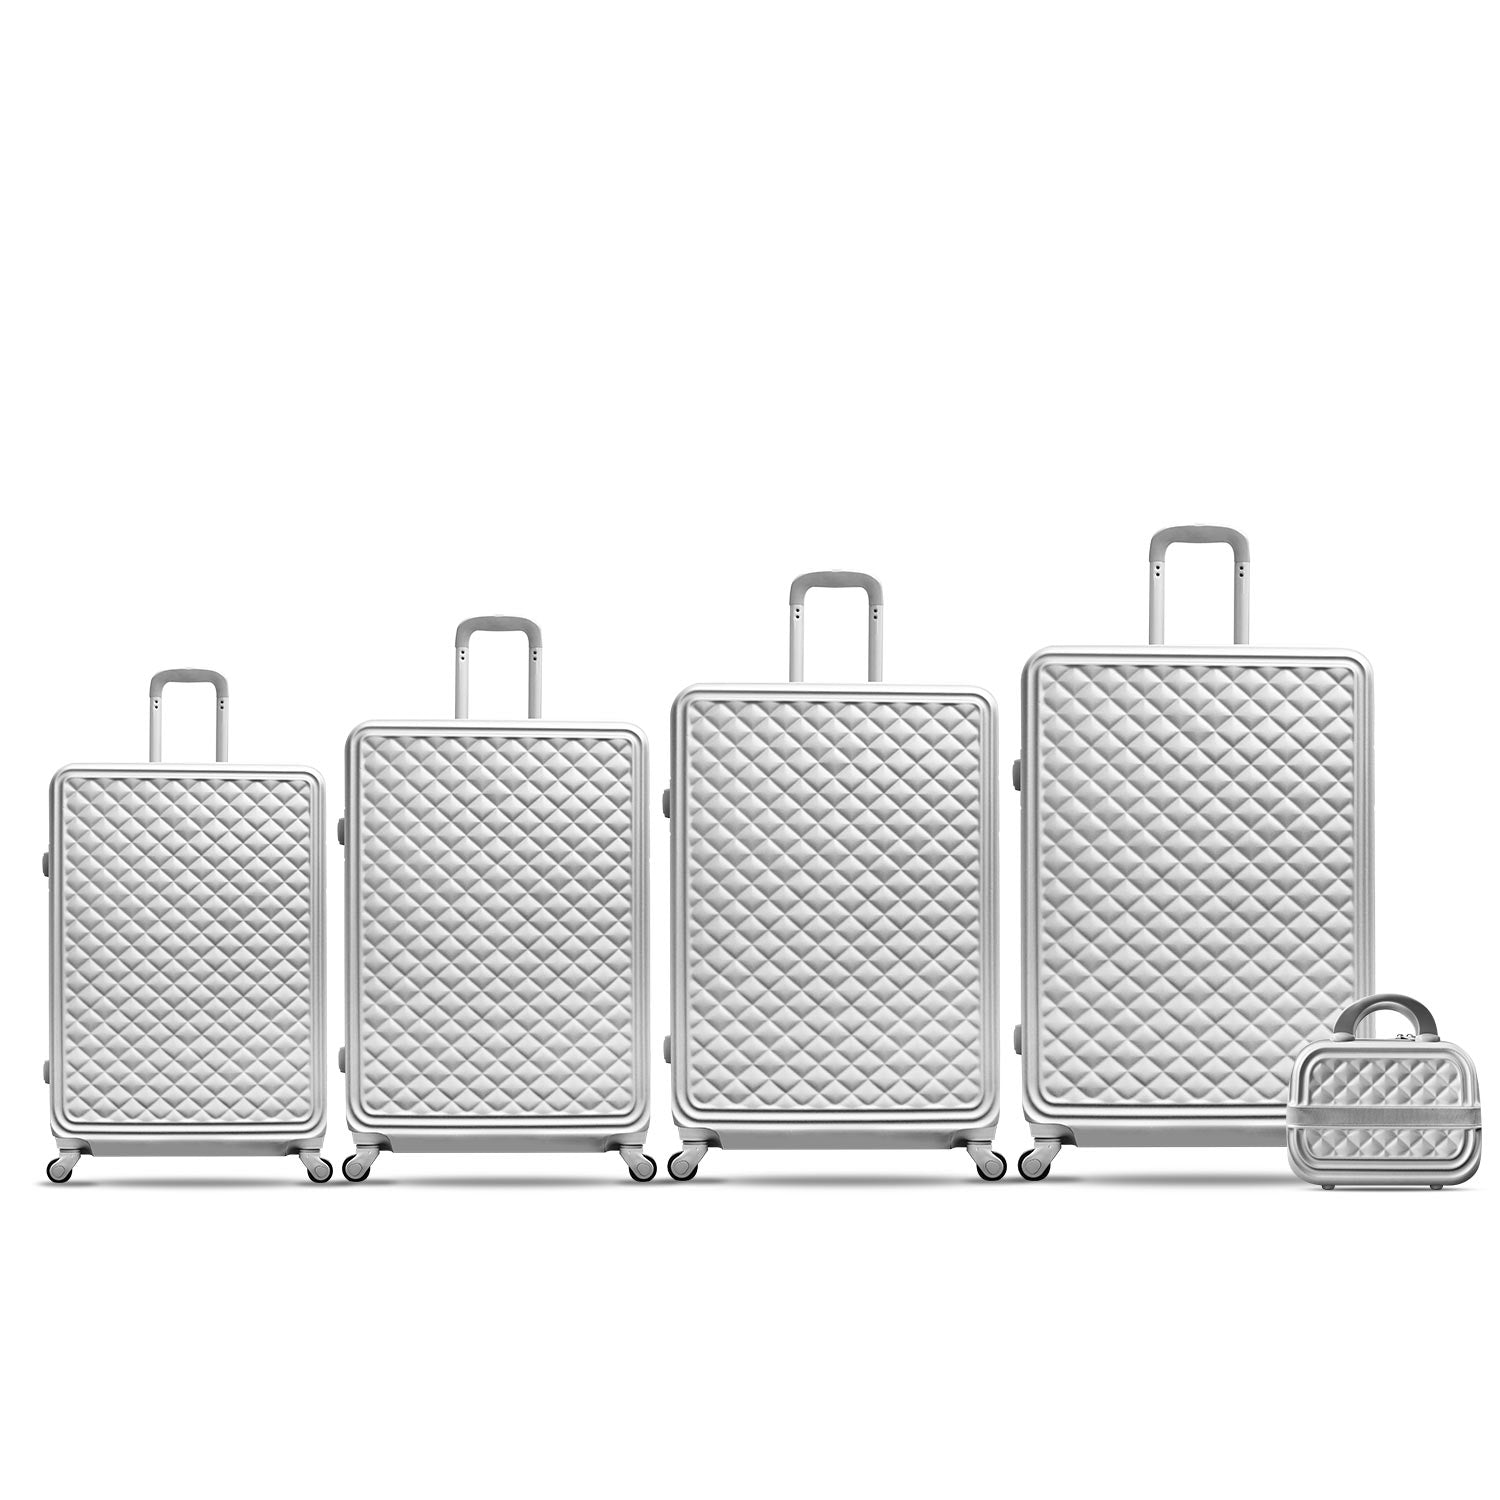 SUMO X-VOYAGER ABS LUGGAGE  5PC SET (12/20/24/28/32")